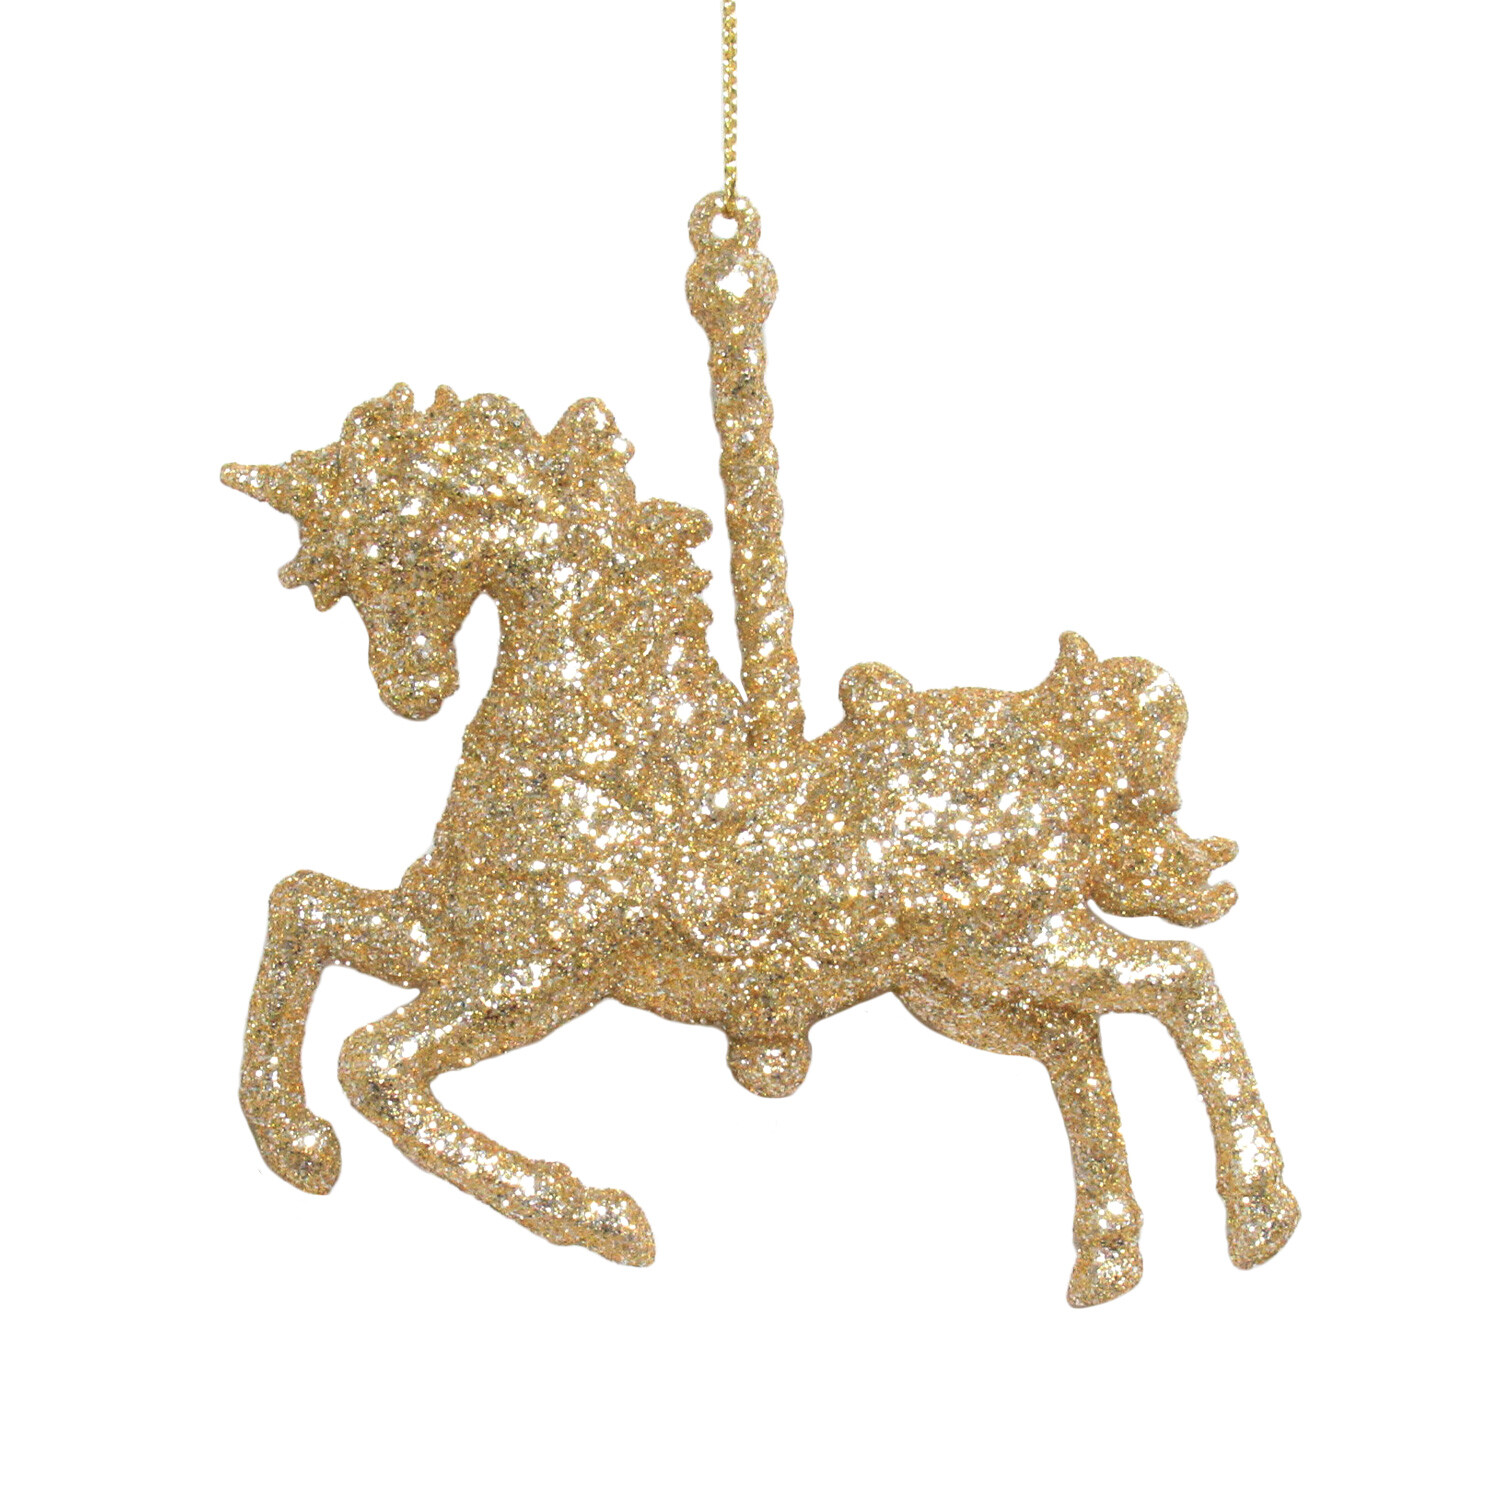 Single Grace & Glory Gold Glitter Carrousel Ornament in Assorted styles Image 1